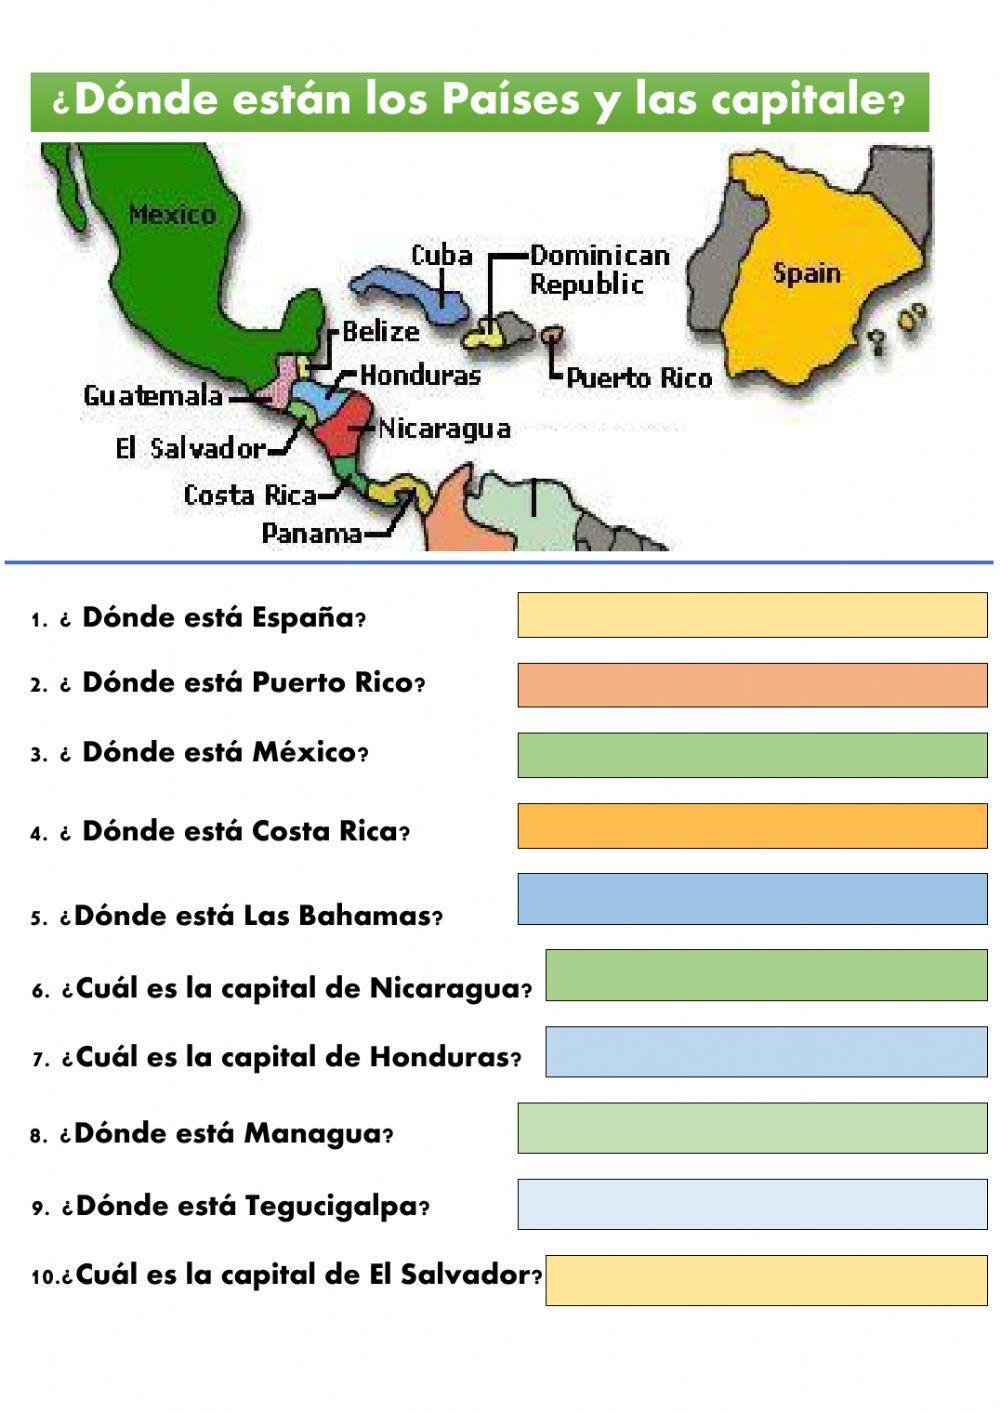 Spanish Speaking Countries in Central America